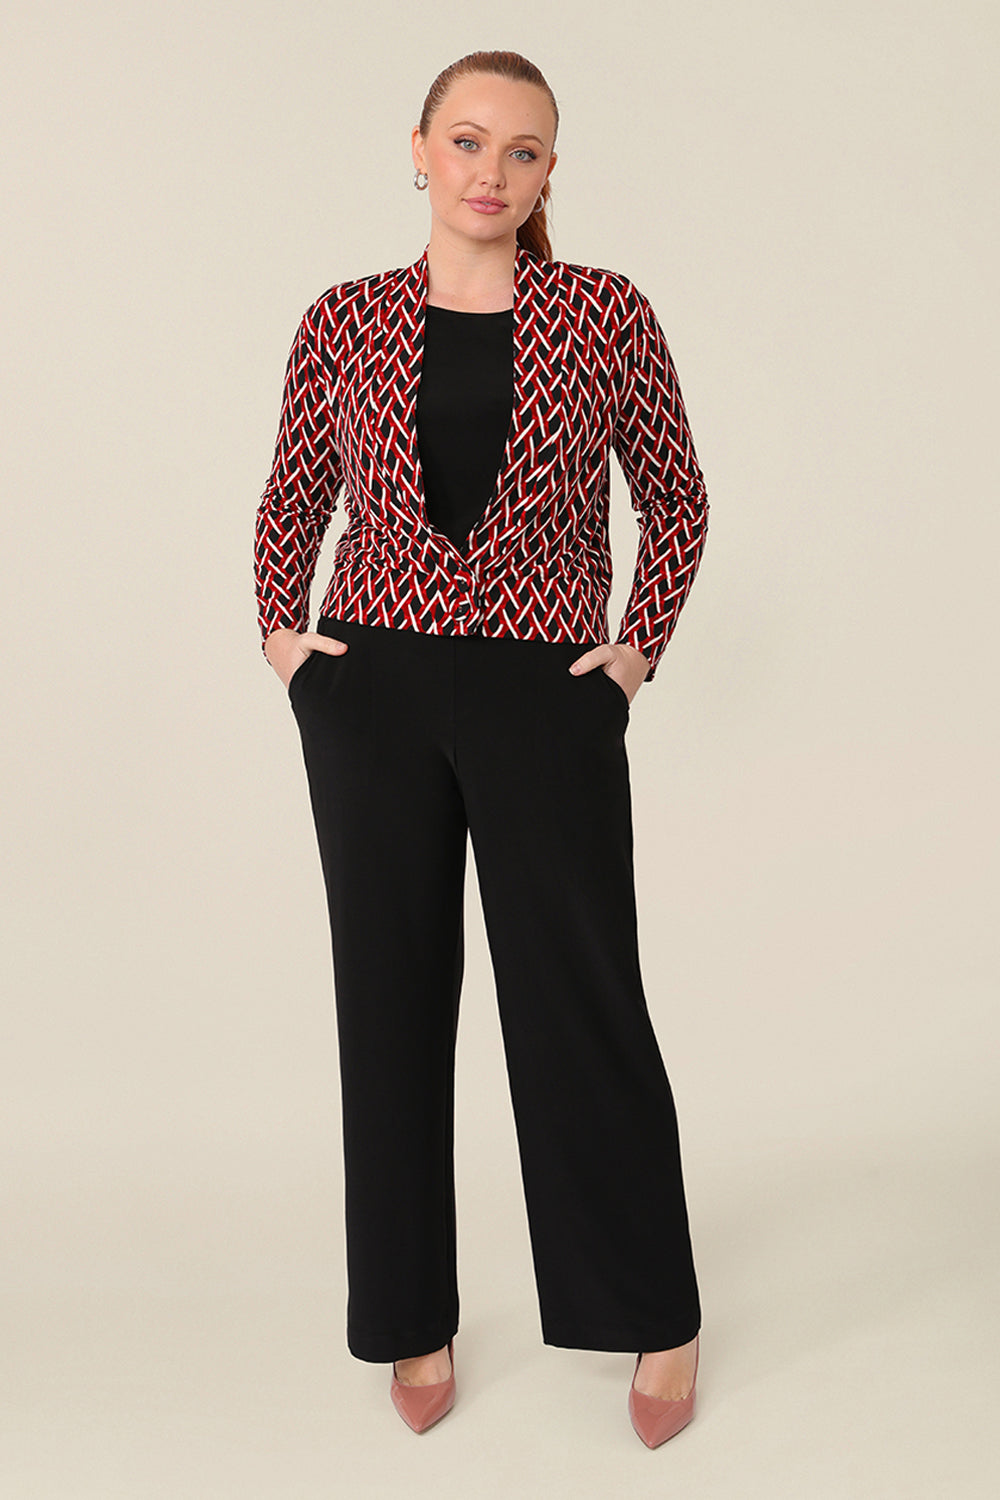 A curvy woman wears a soft jacket/cardigan with long sleeves and covered button fastenings, with a black top and wide leg black work pants. An easy throw on jacket for work, office and casual wear, shop made-in-Australia workwear petite to plus sizes